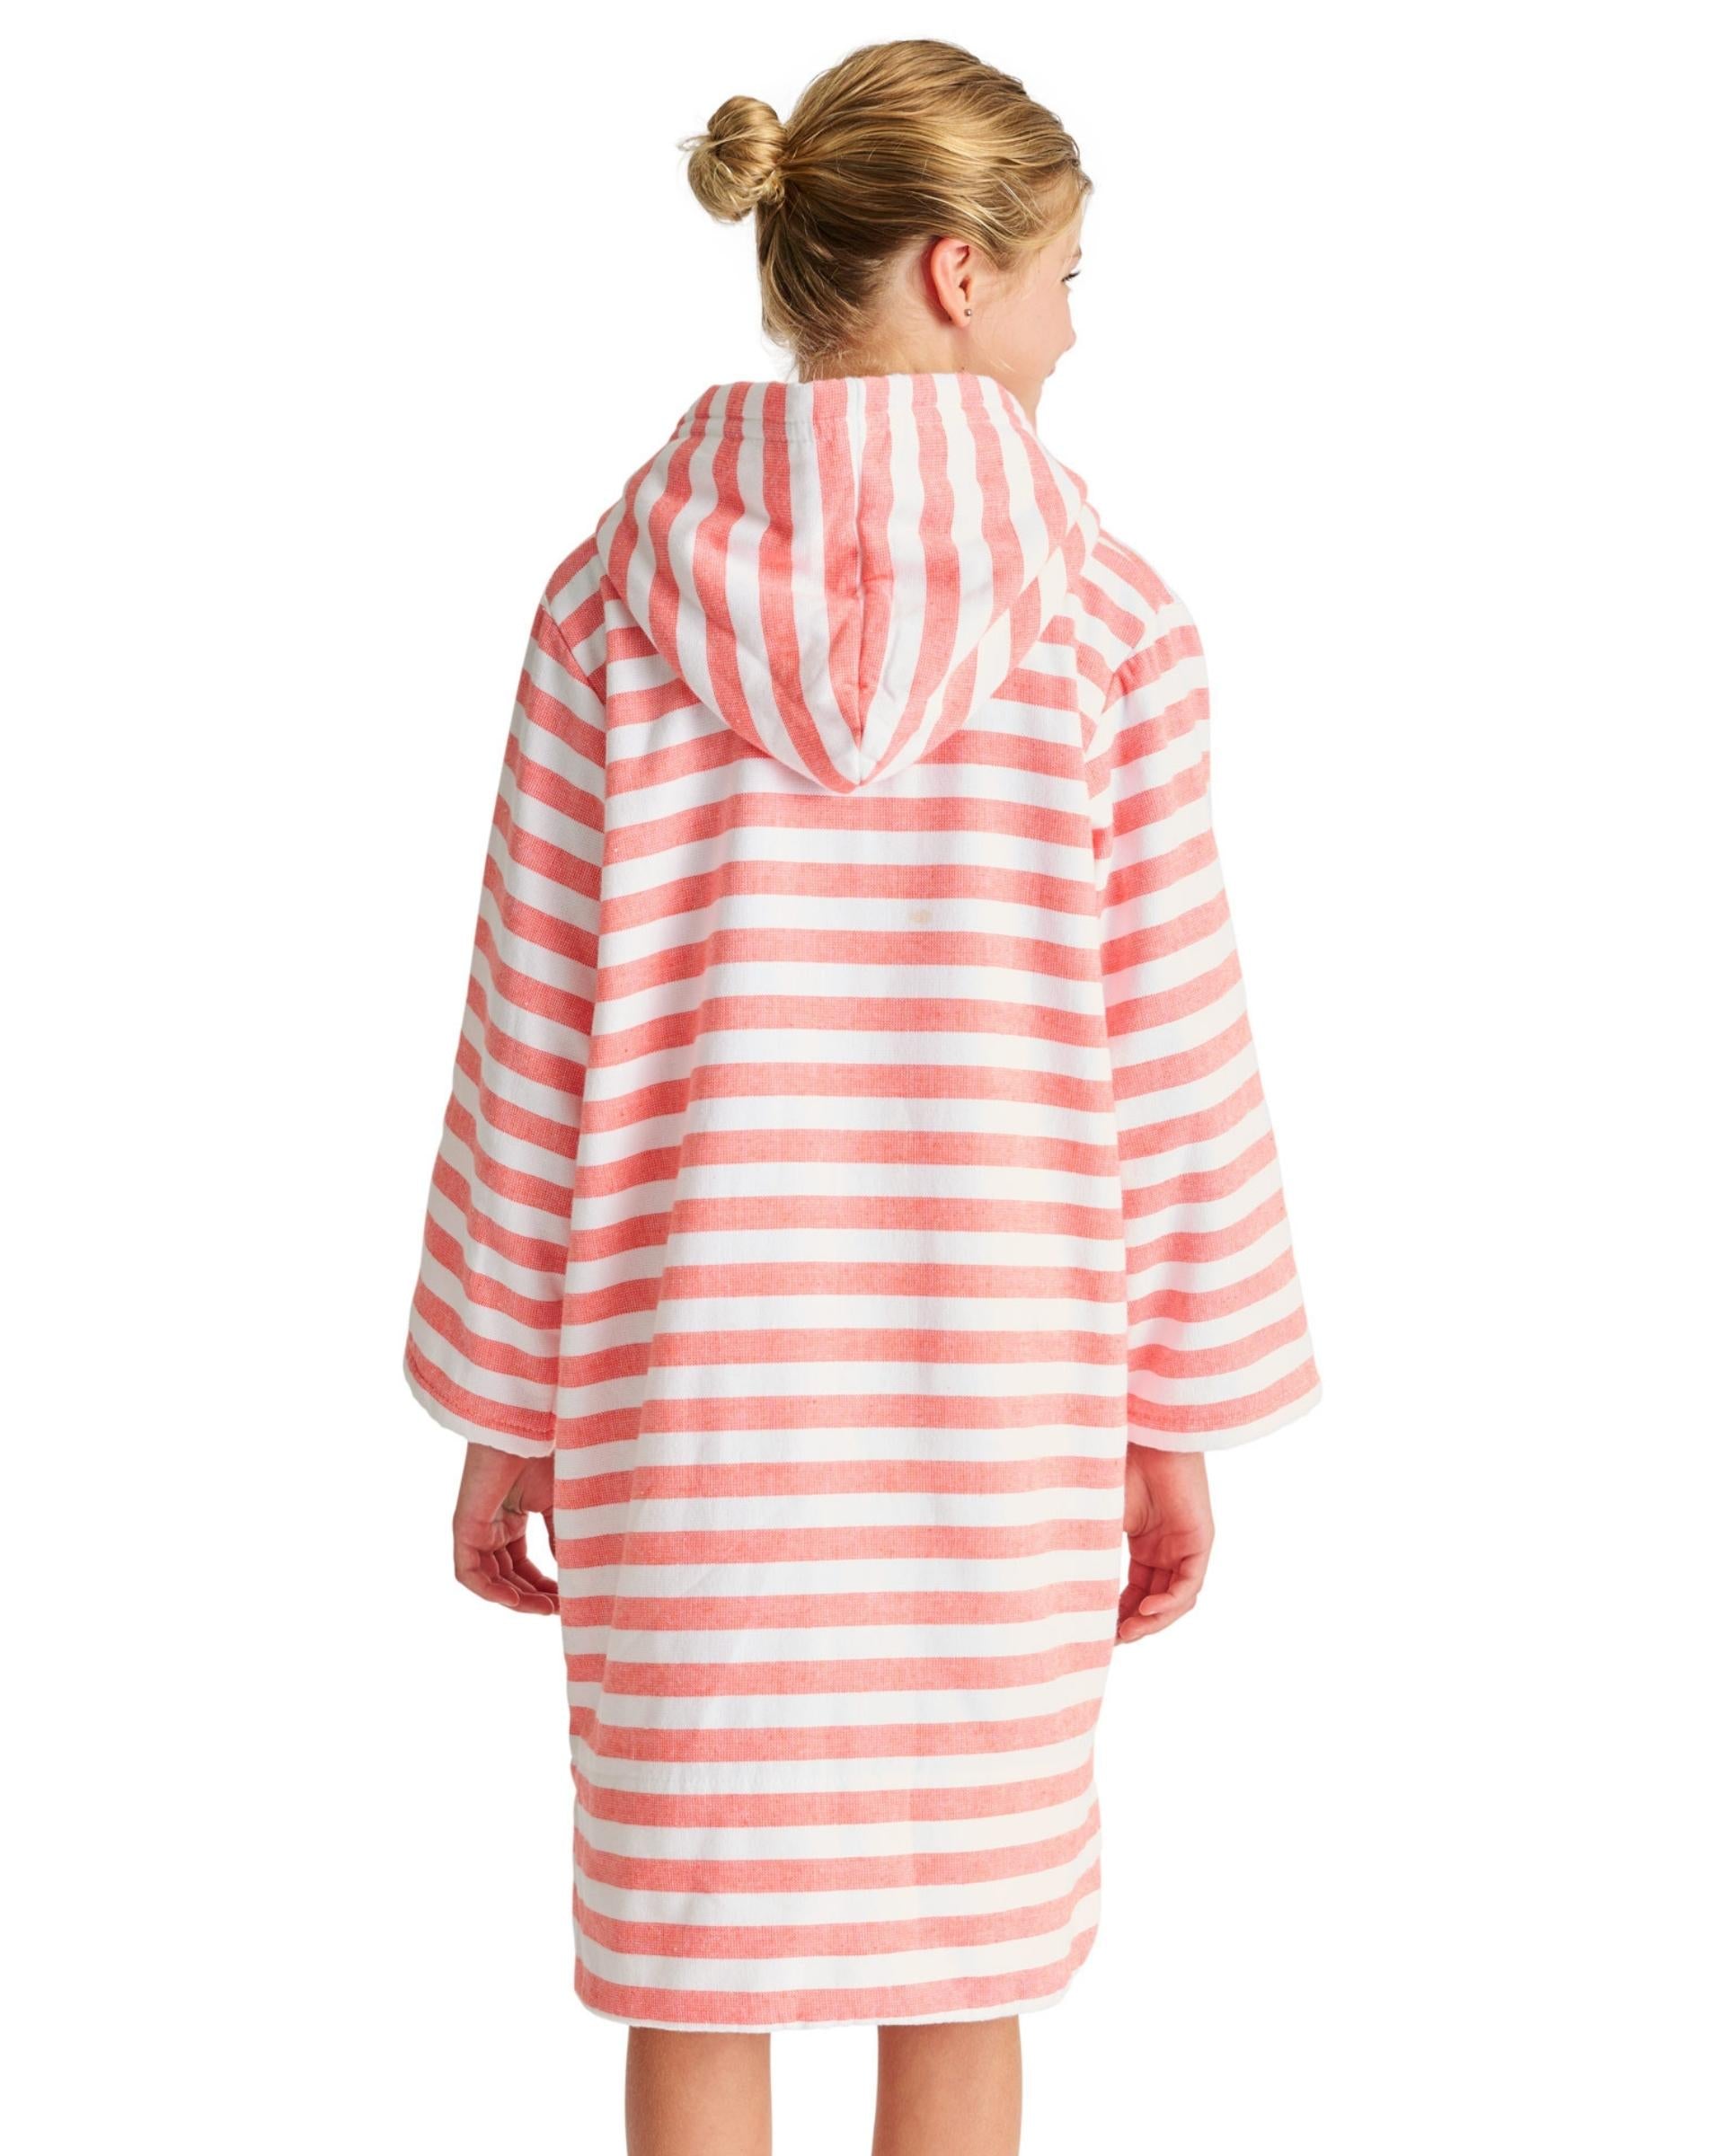 MENORCA Kids Terry Hooded Towel: Coral/White